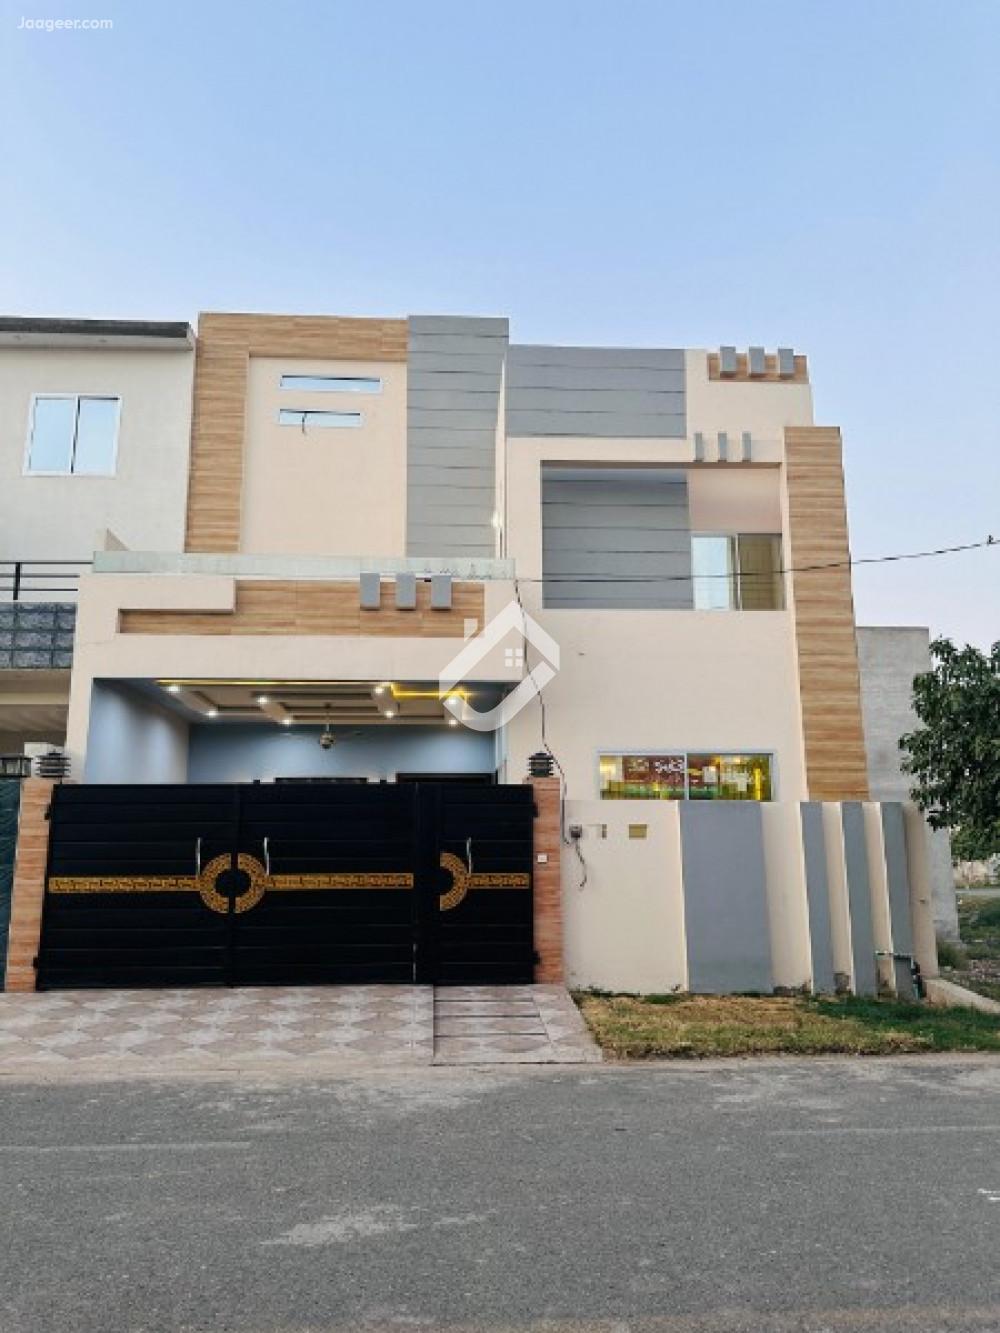 Main image 7 Marla House For Sale In Gulberg City  New satelite town